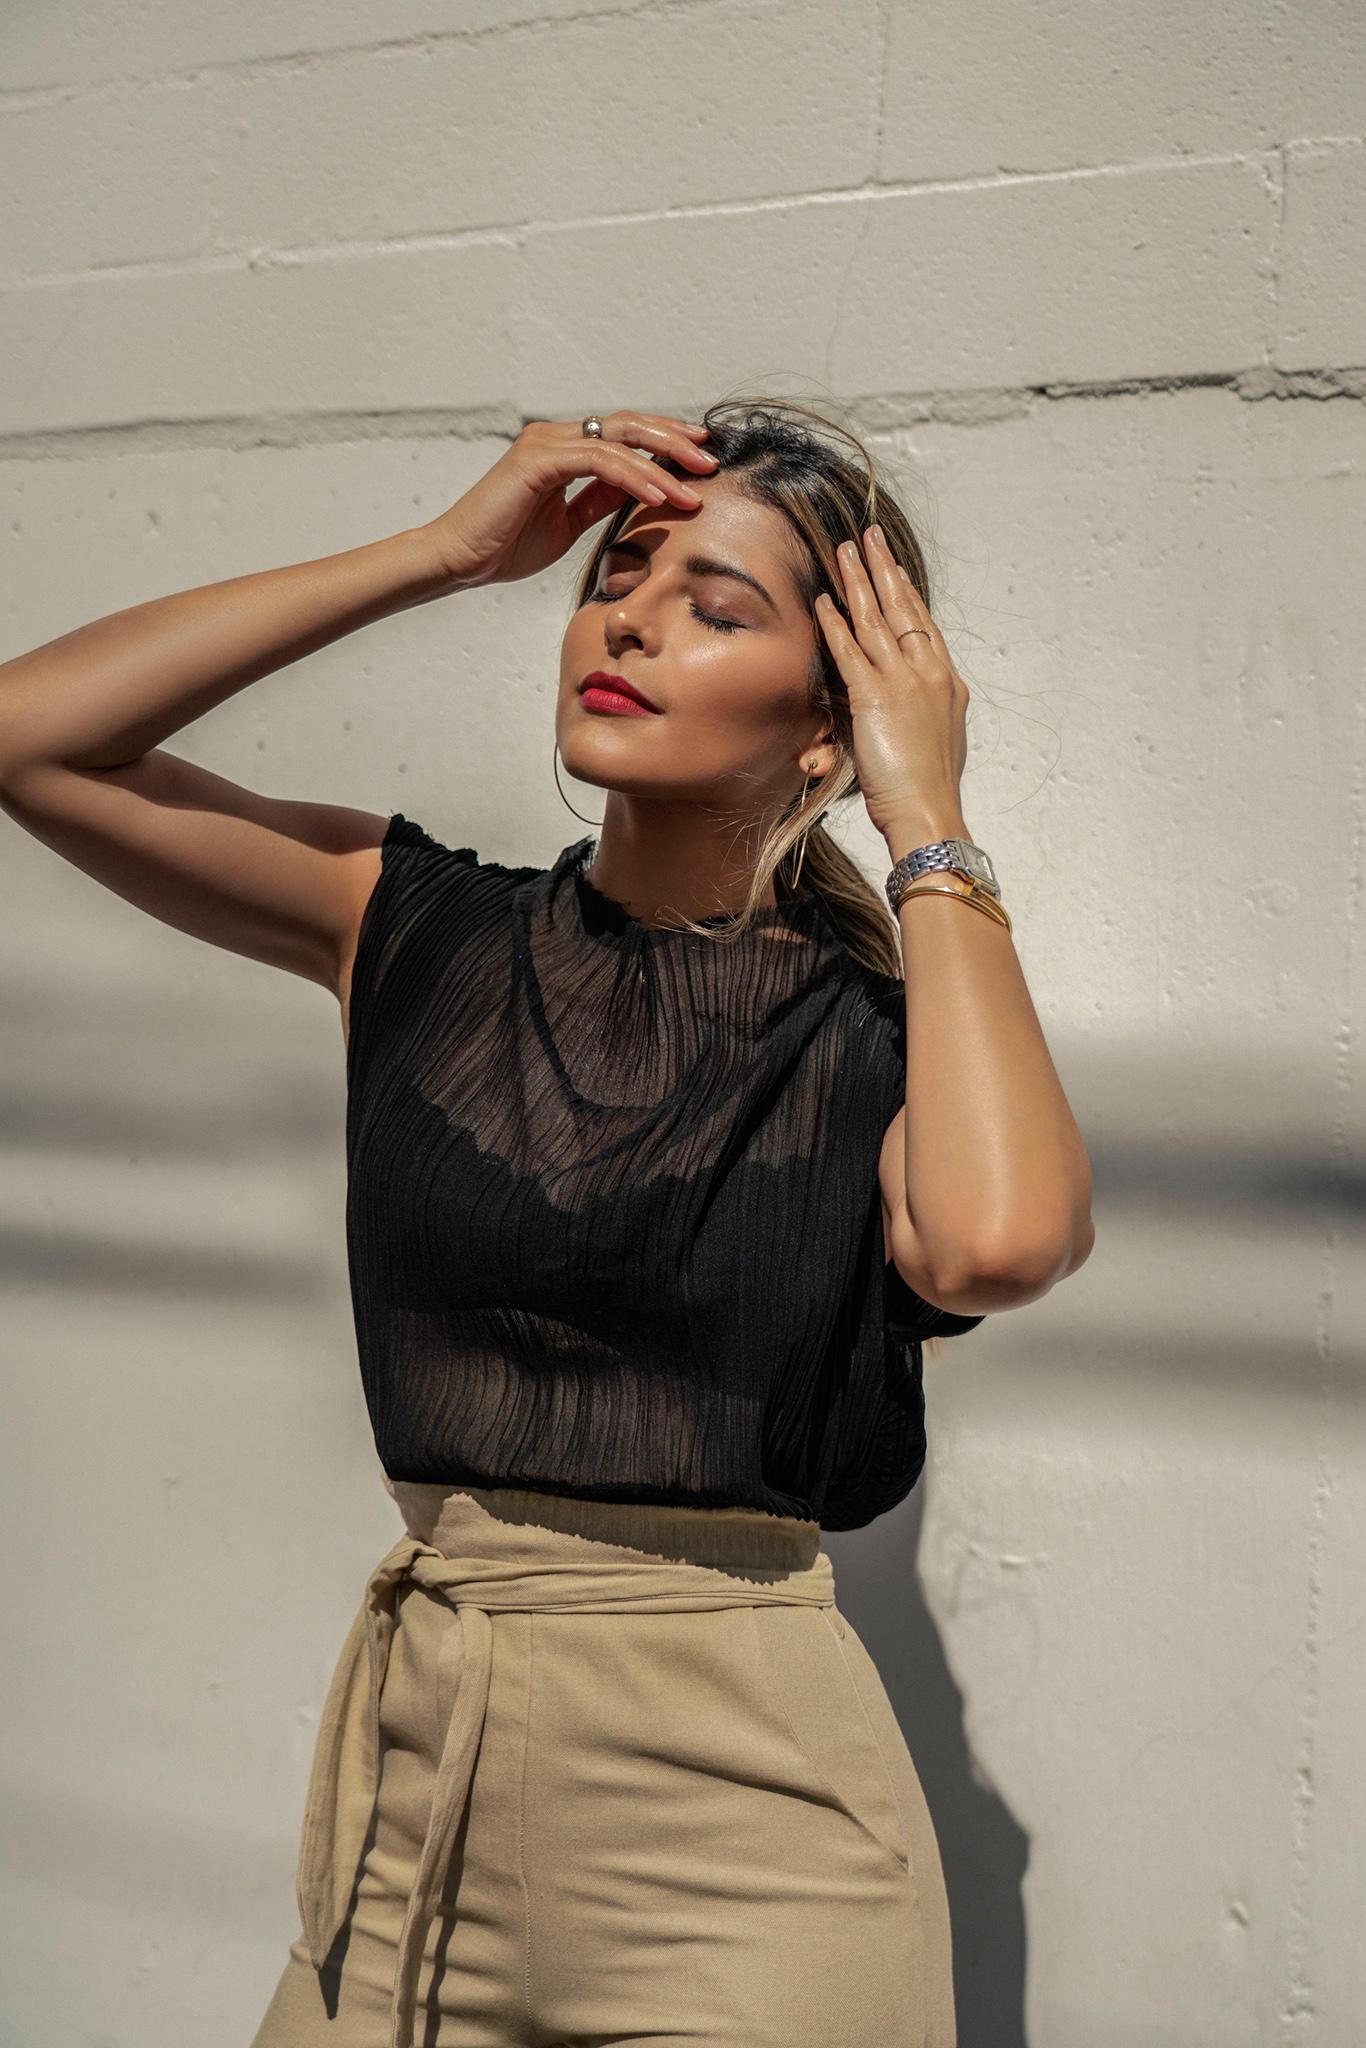 Chic Outfits That Never Go Out of Style by Pam Hetlinger | TheGirlFromPanama.com | Black Sheer Top, Sheer top outfit, tie waist trousers, chic weekend style, classy style